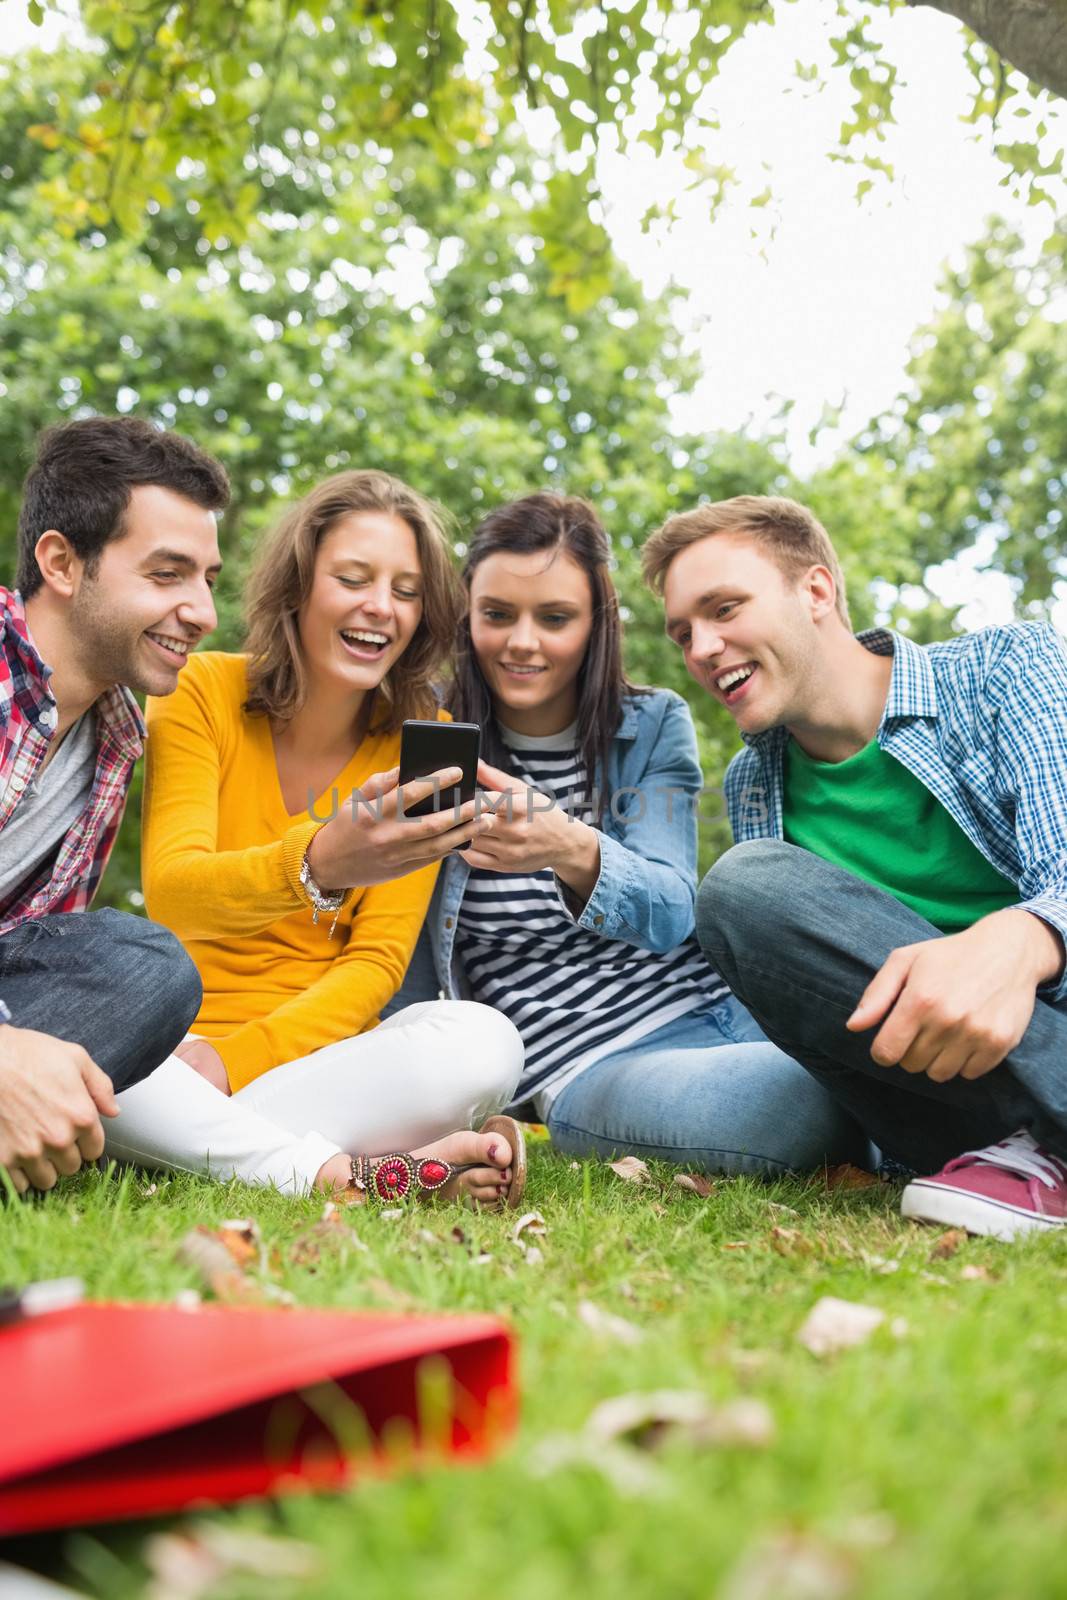 Group of happy young college students looking at mobile phone in the park